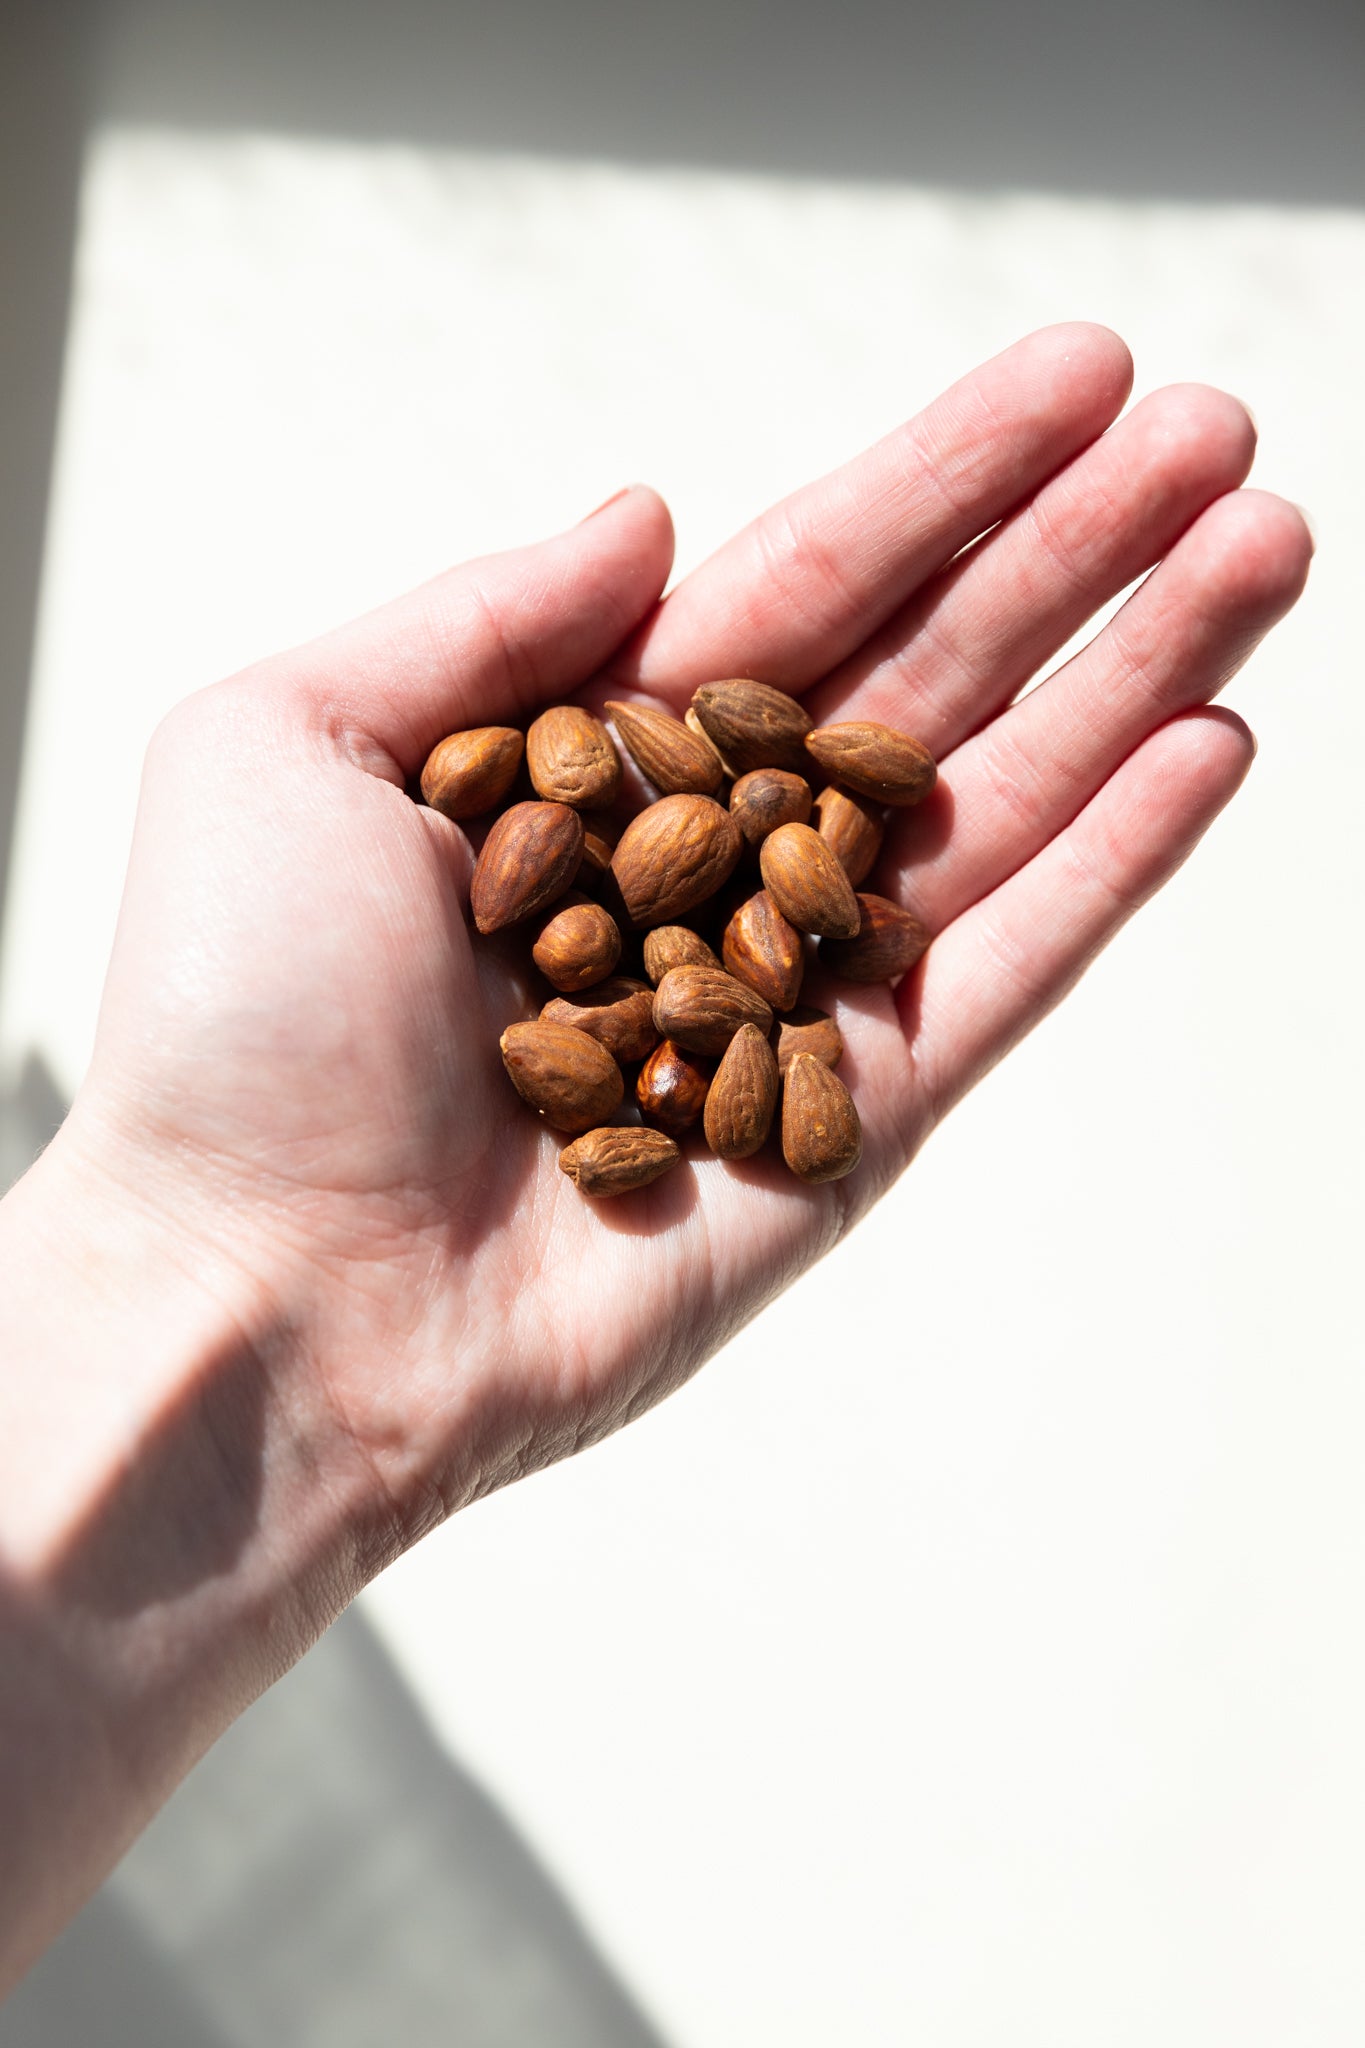 Delicious Ingredients Make Delicious Food - More on our Almonds